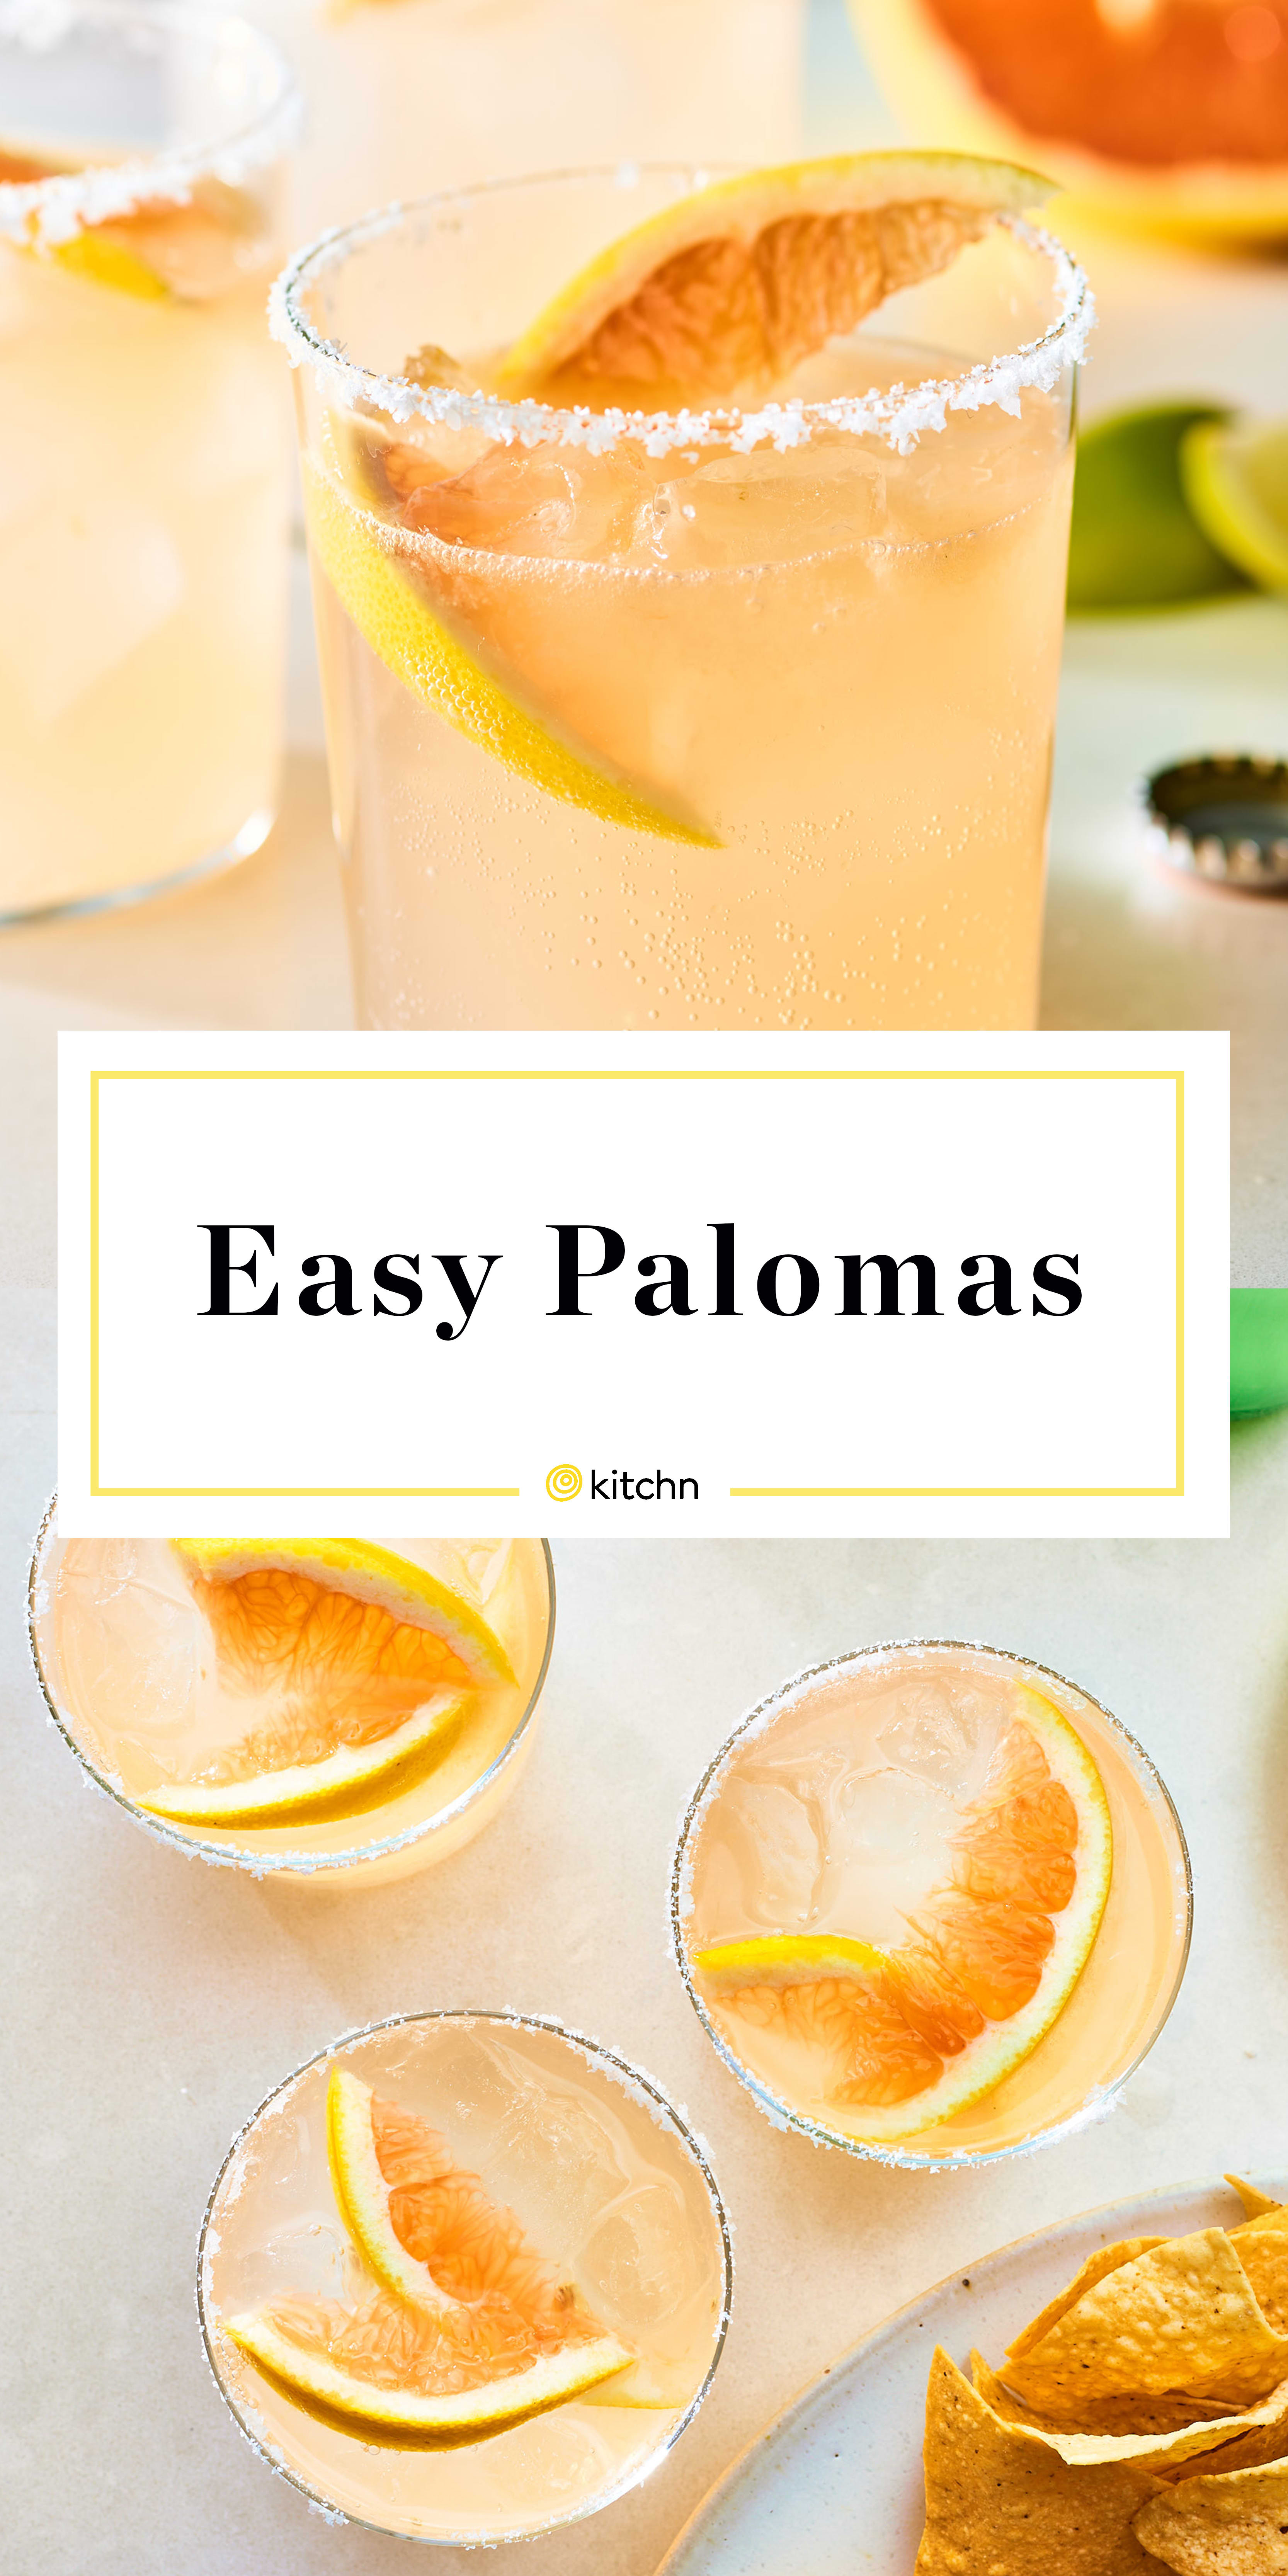 Paloma Recipe (How to Make a Paloma Cocktail) - The Forked Spoon